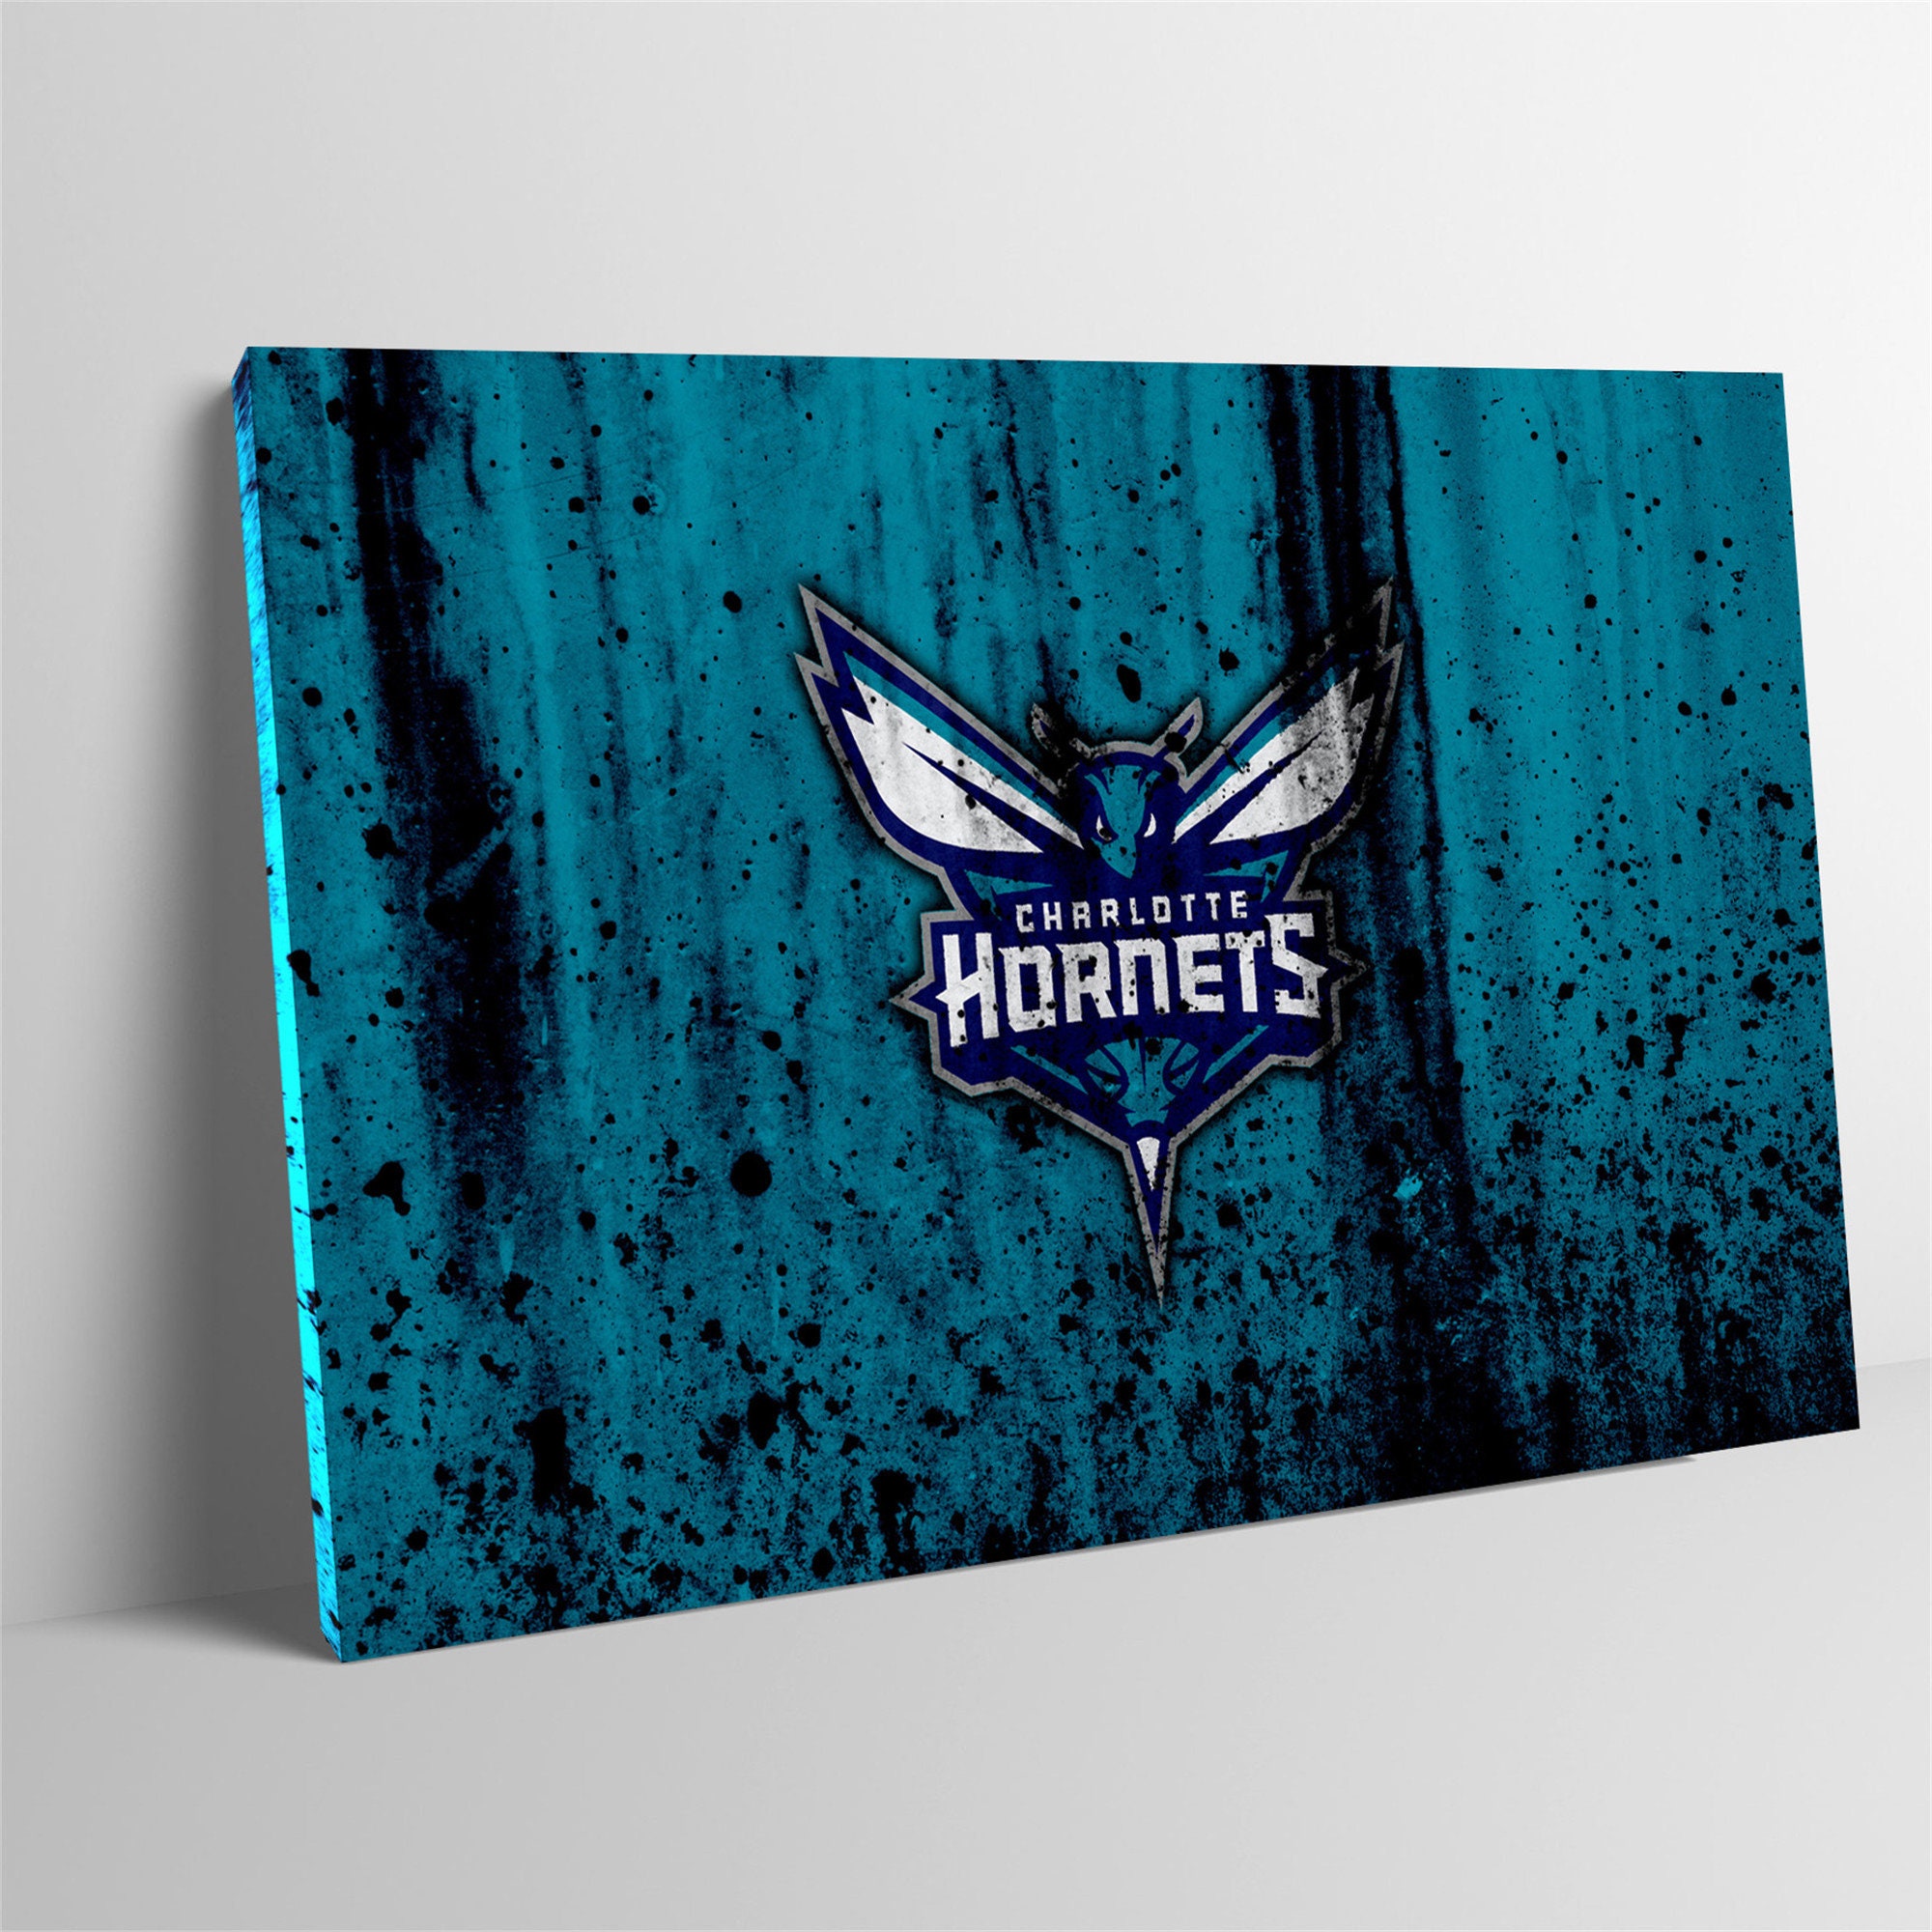 Charlotte Hornets T-Shirt in Teal - Glue Store